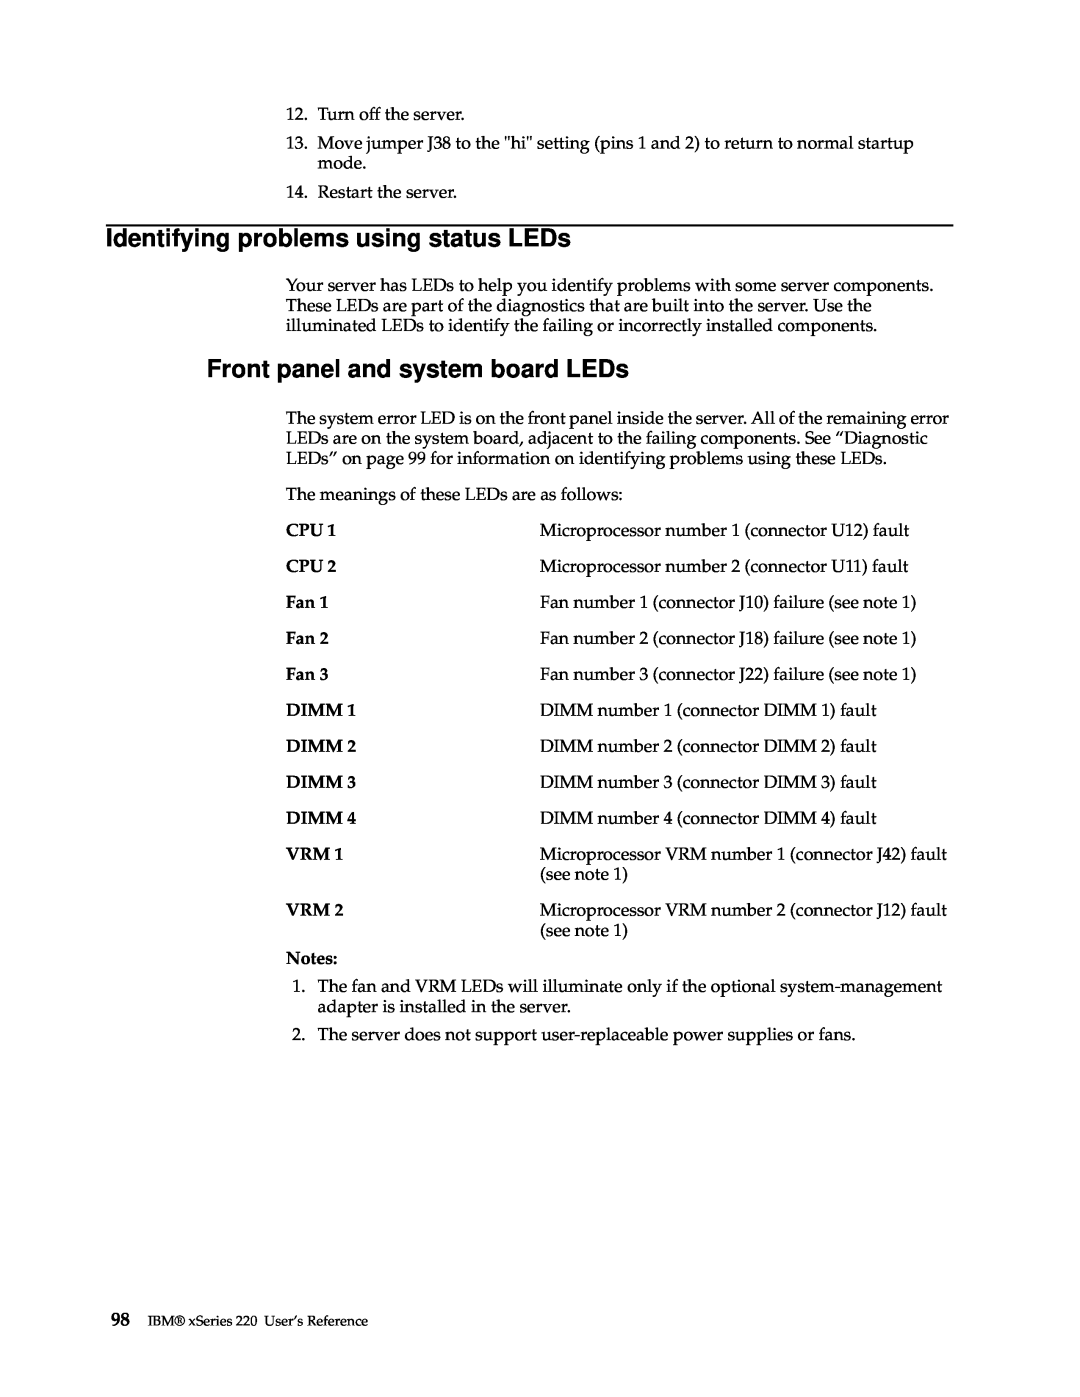 IBM 220 manual Identifying problems using status LEDs, Front panel and system board LEDs, Dimm 